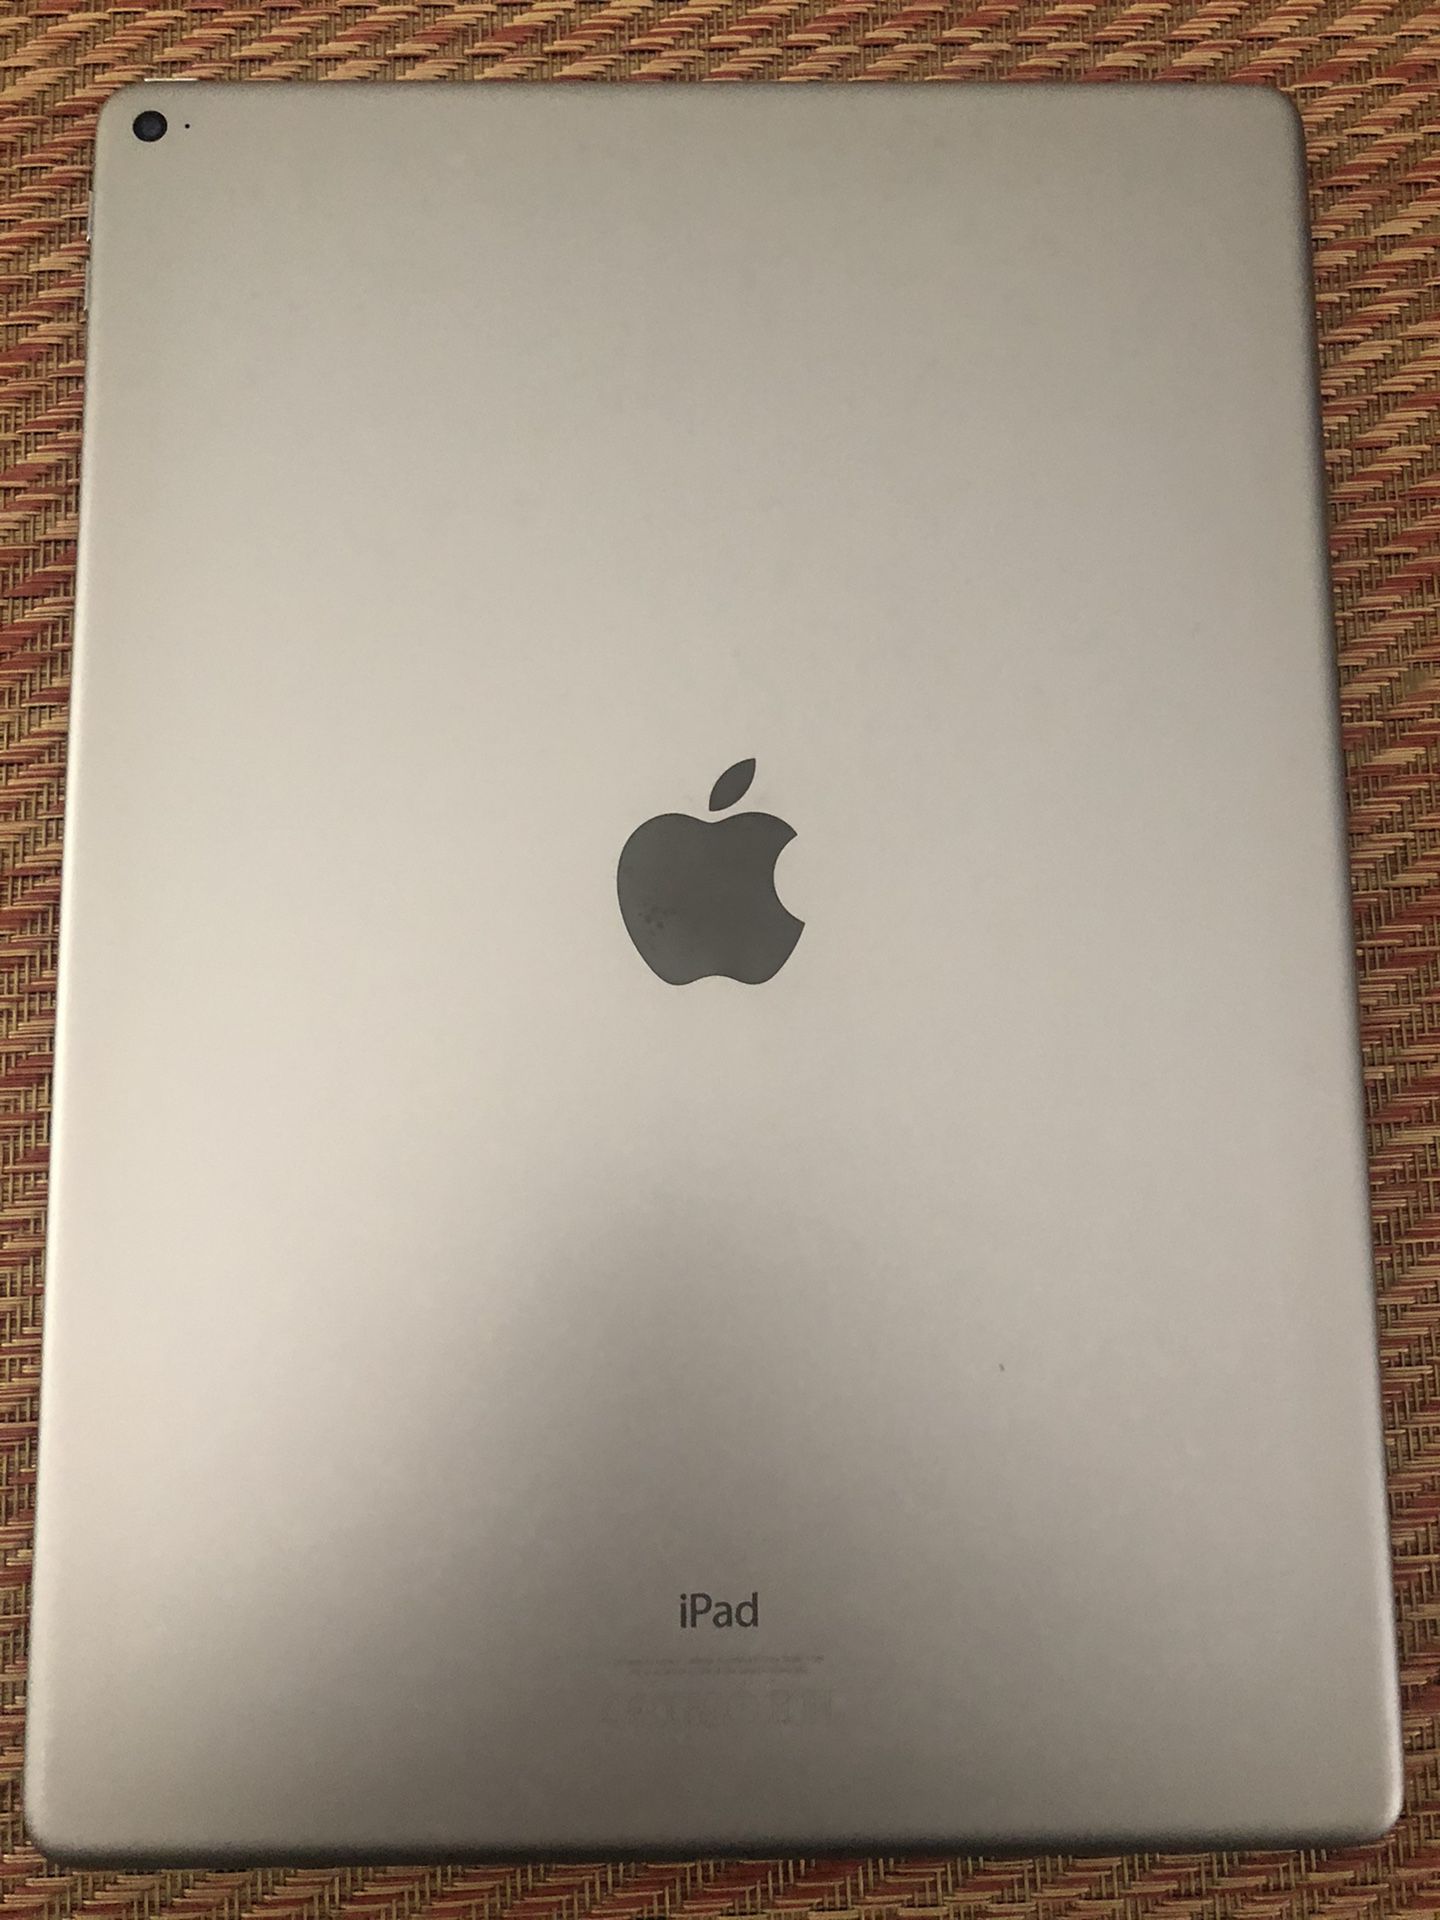 IPad Pro 12.9 inches 128 gb Space gray